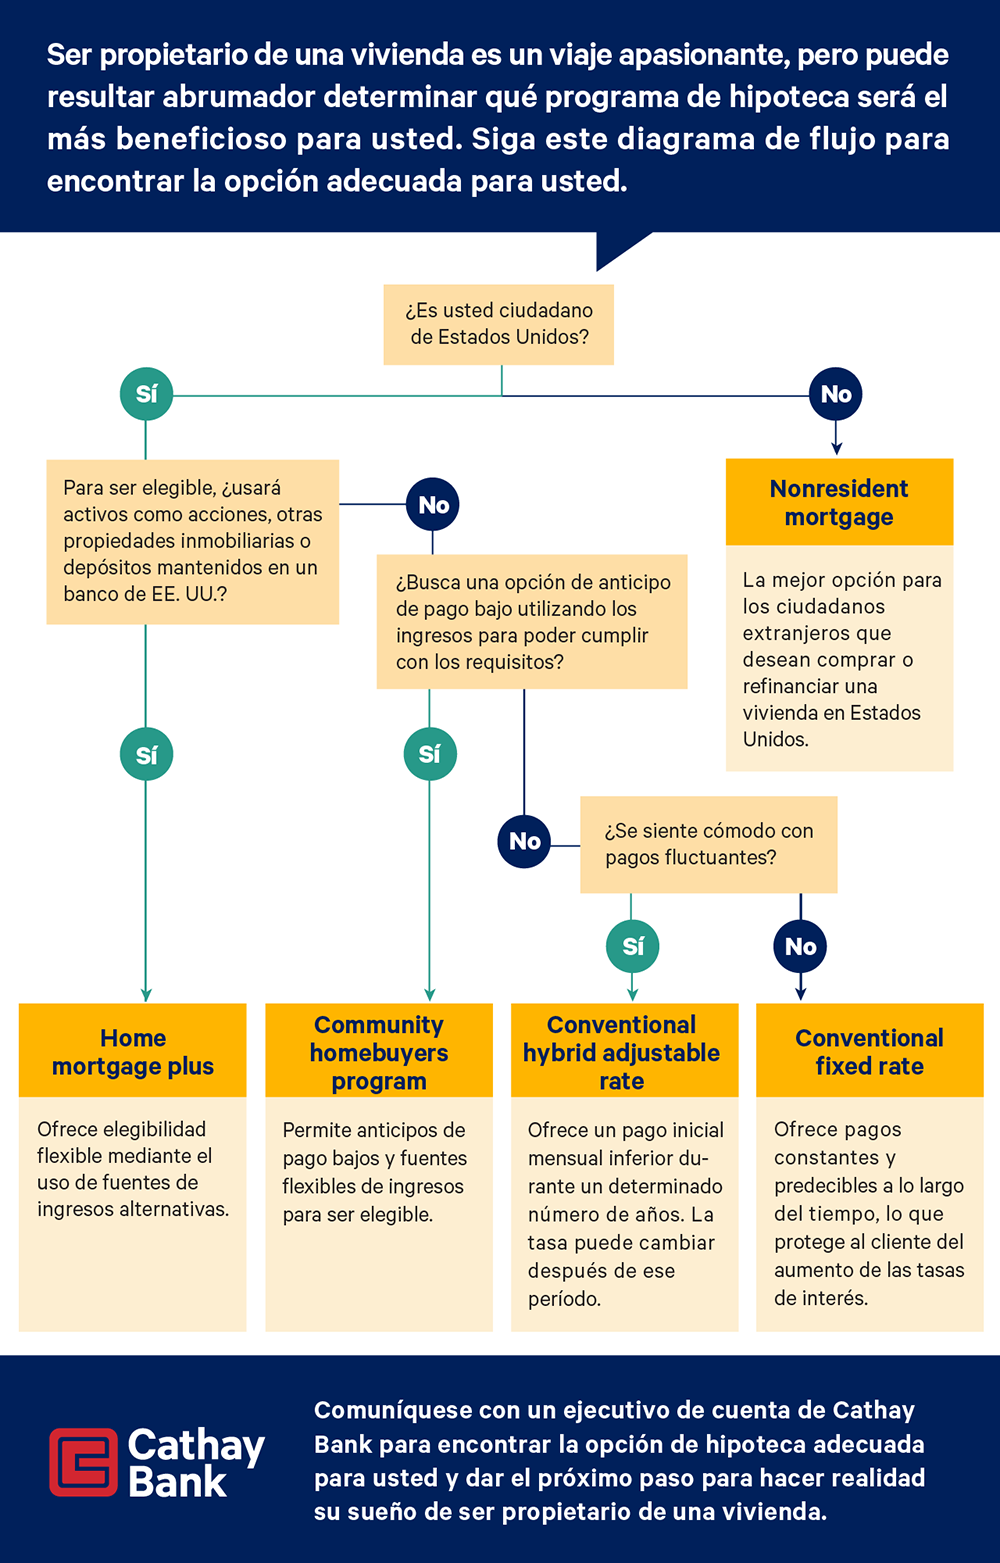 Flowchart containing questions to help identify which mortgage program best suits a homeowner's financial needs